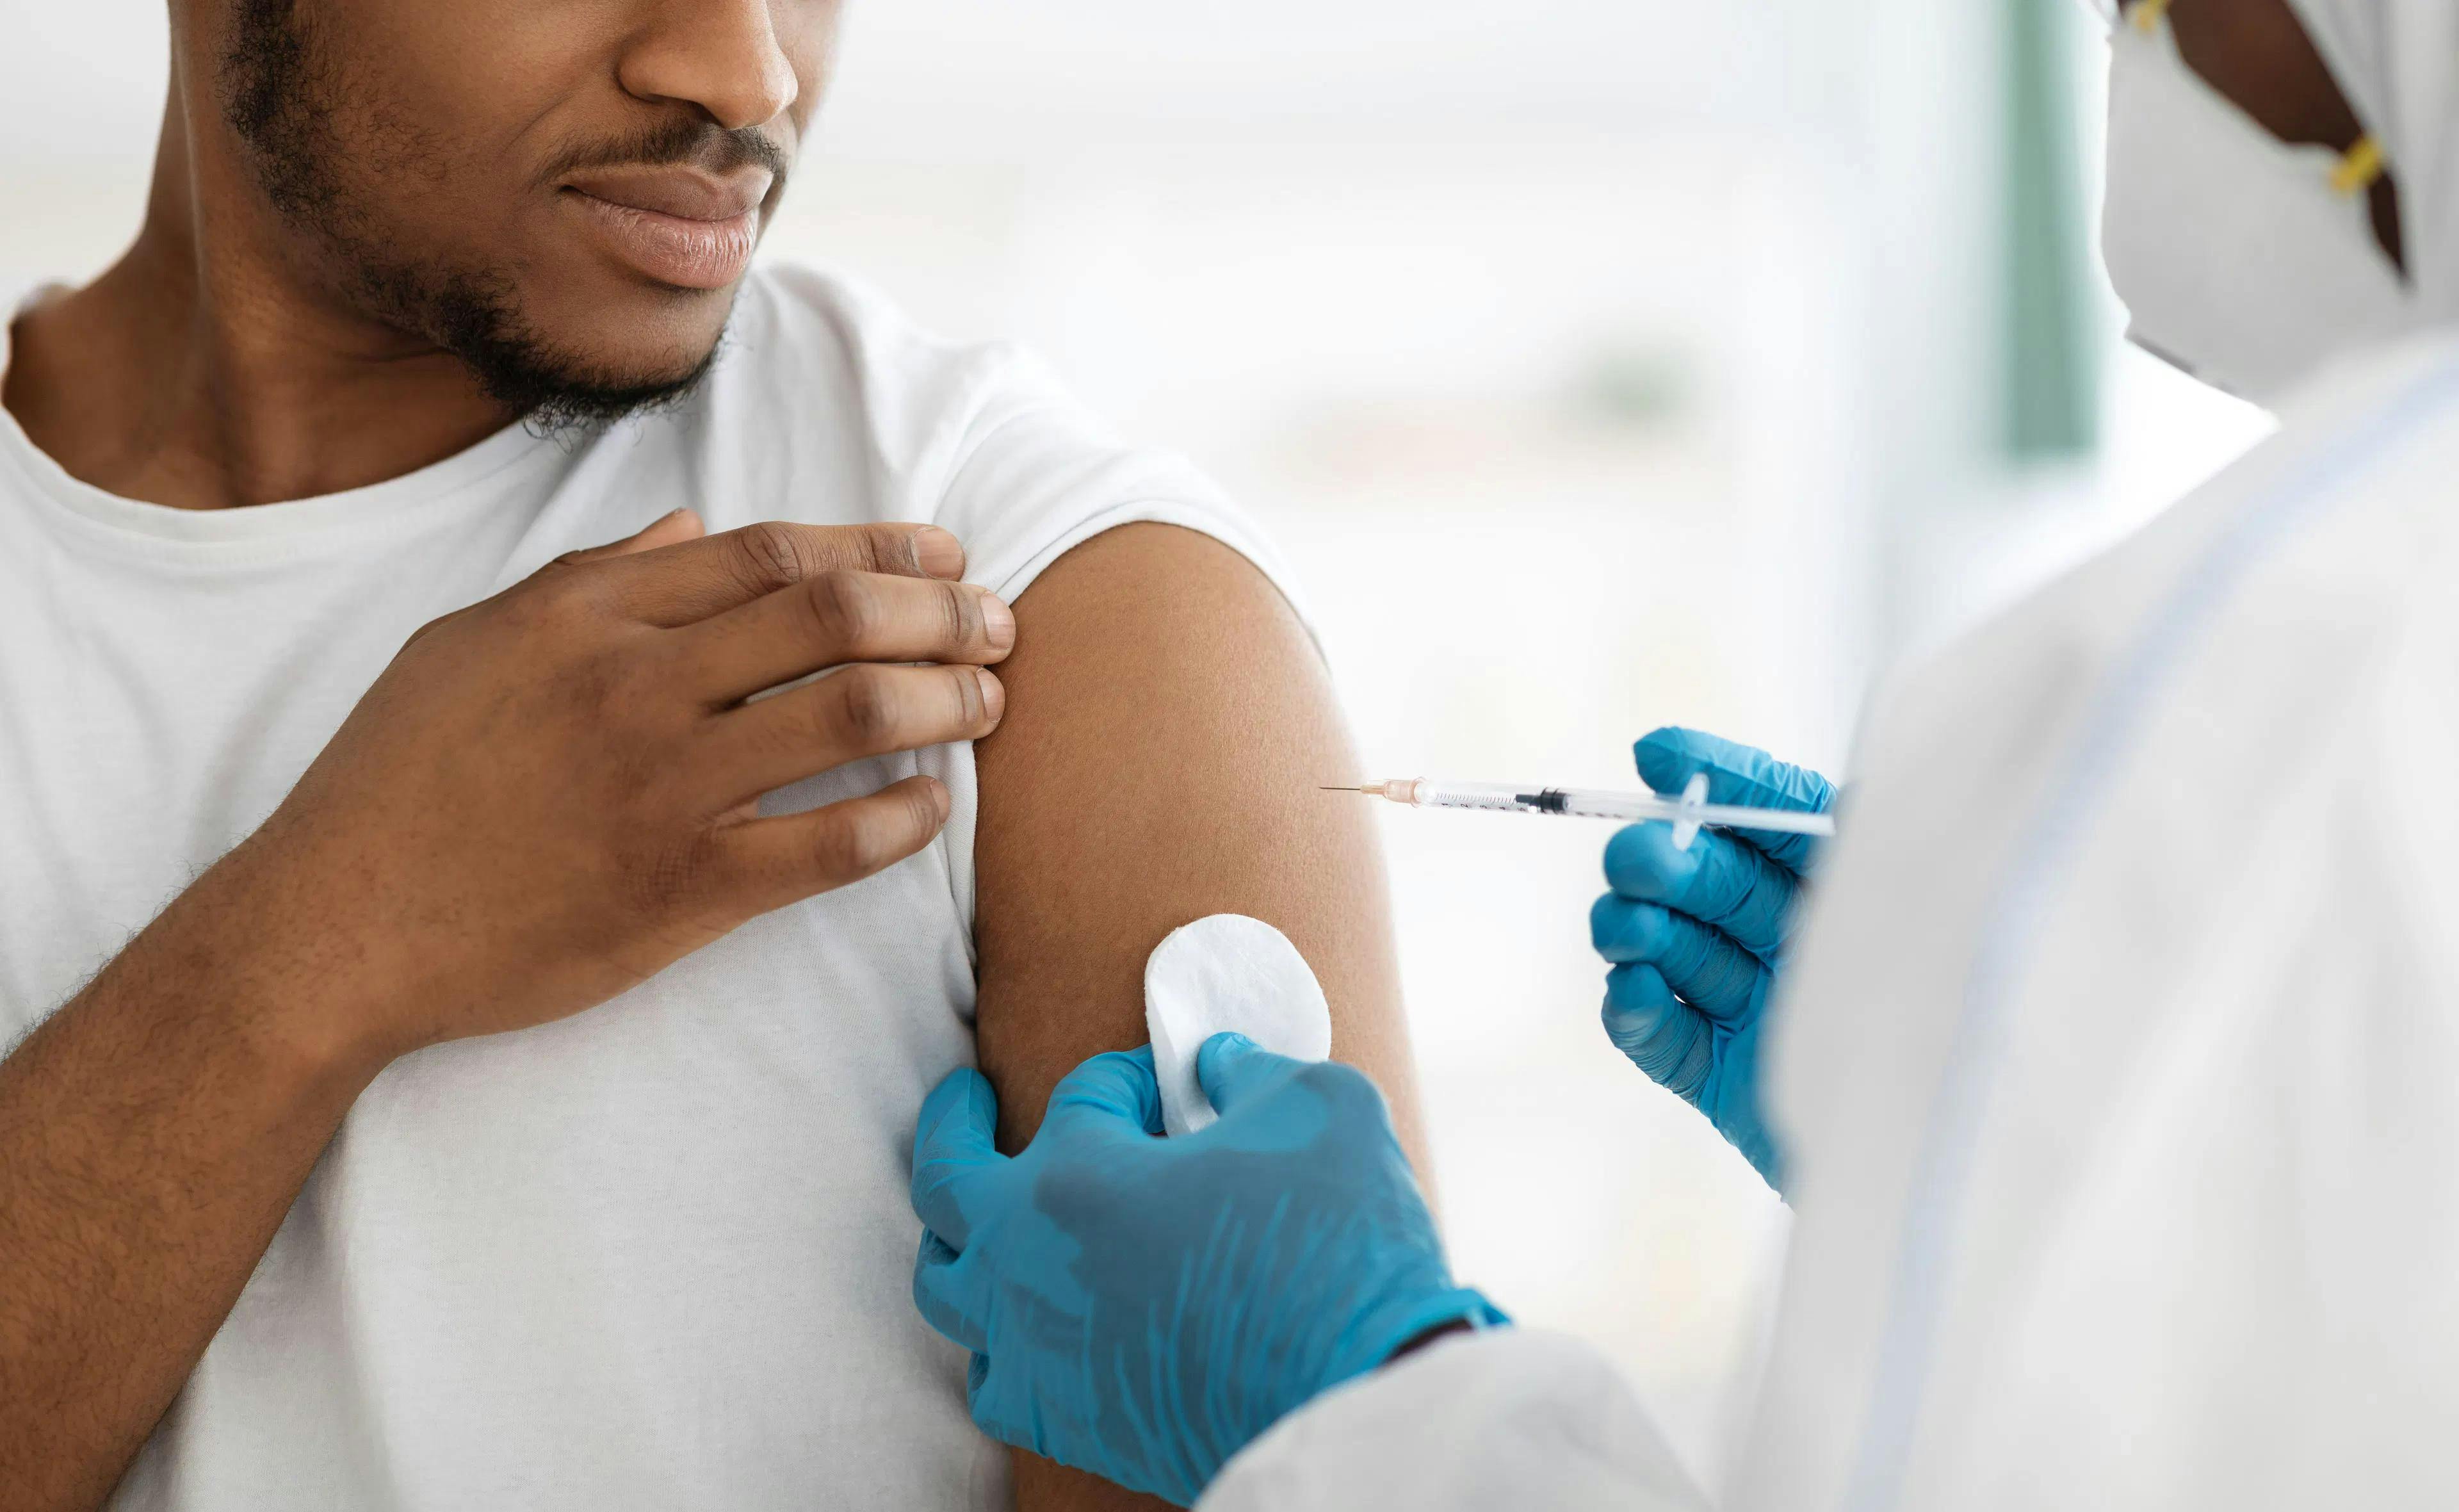 The US Will Transition to Trivalent Vaccines for Next Year's Influenza Season